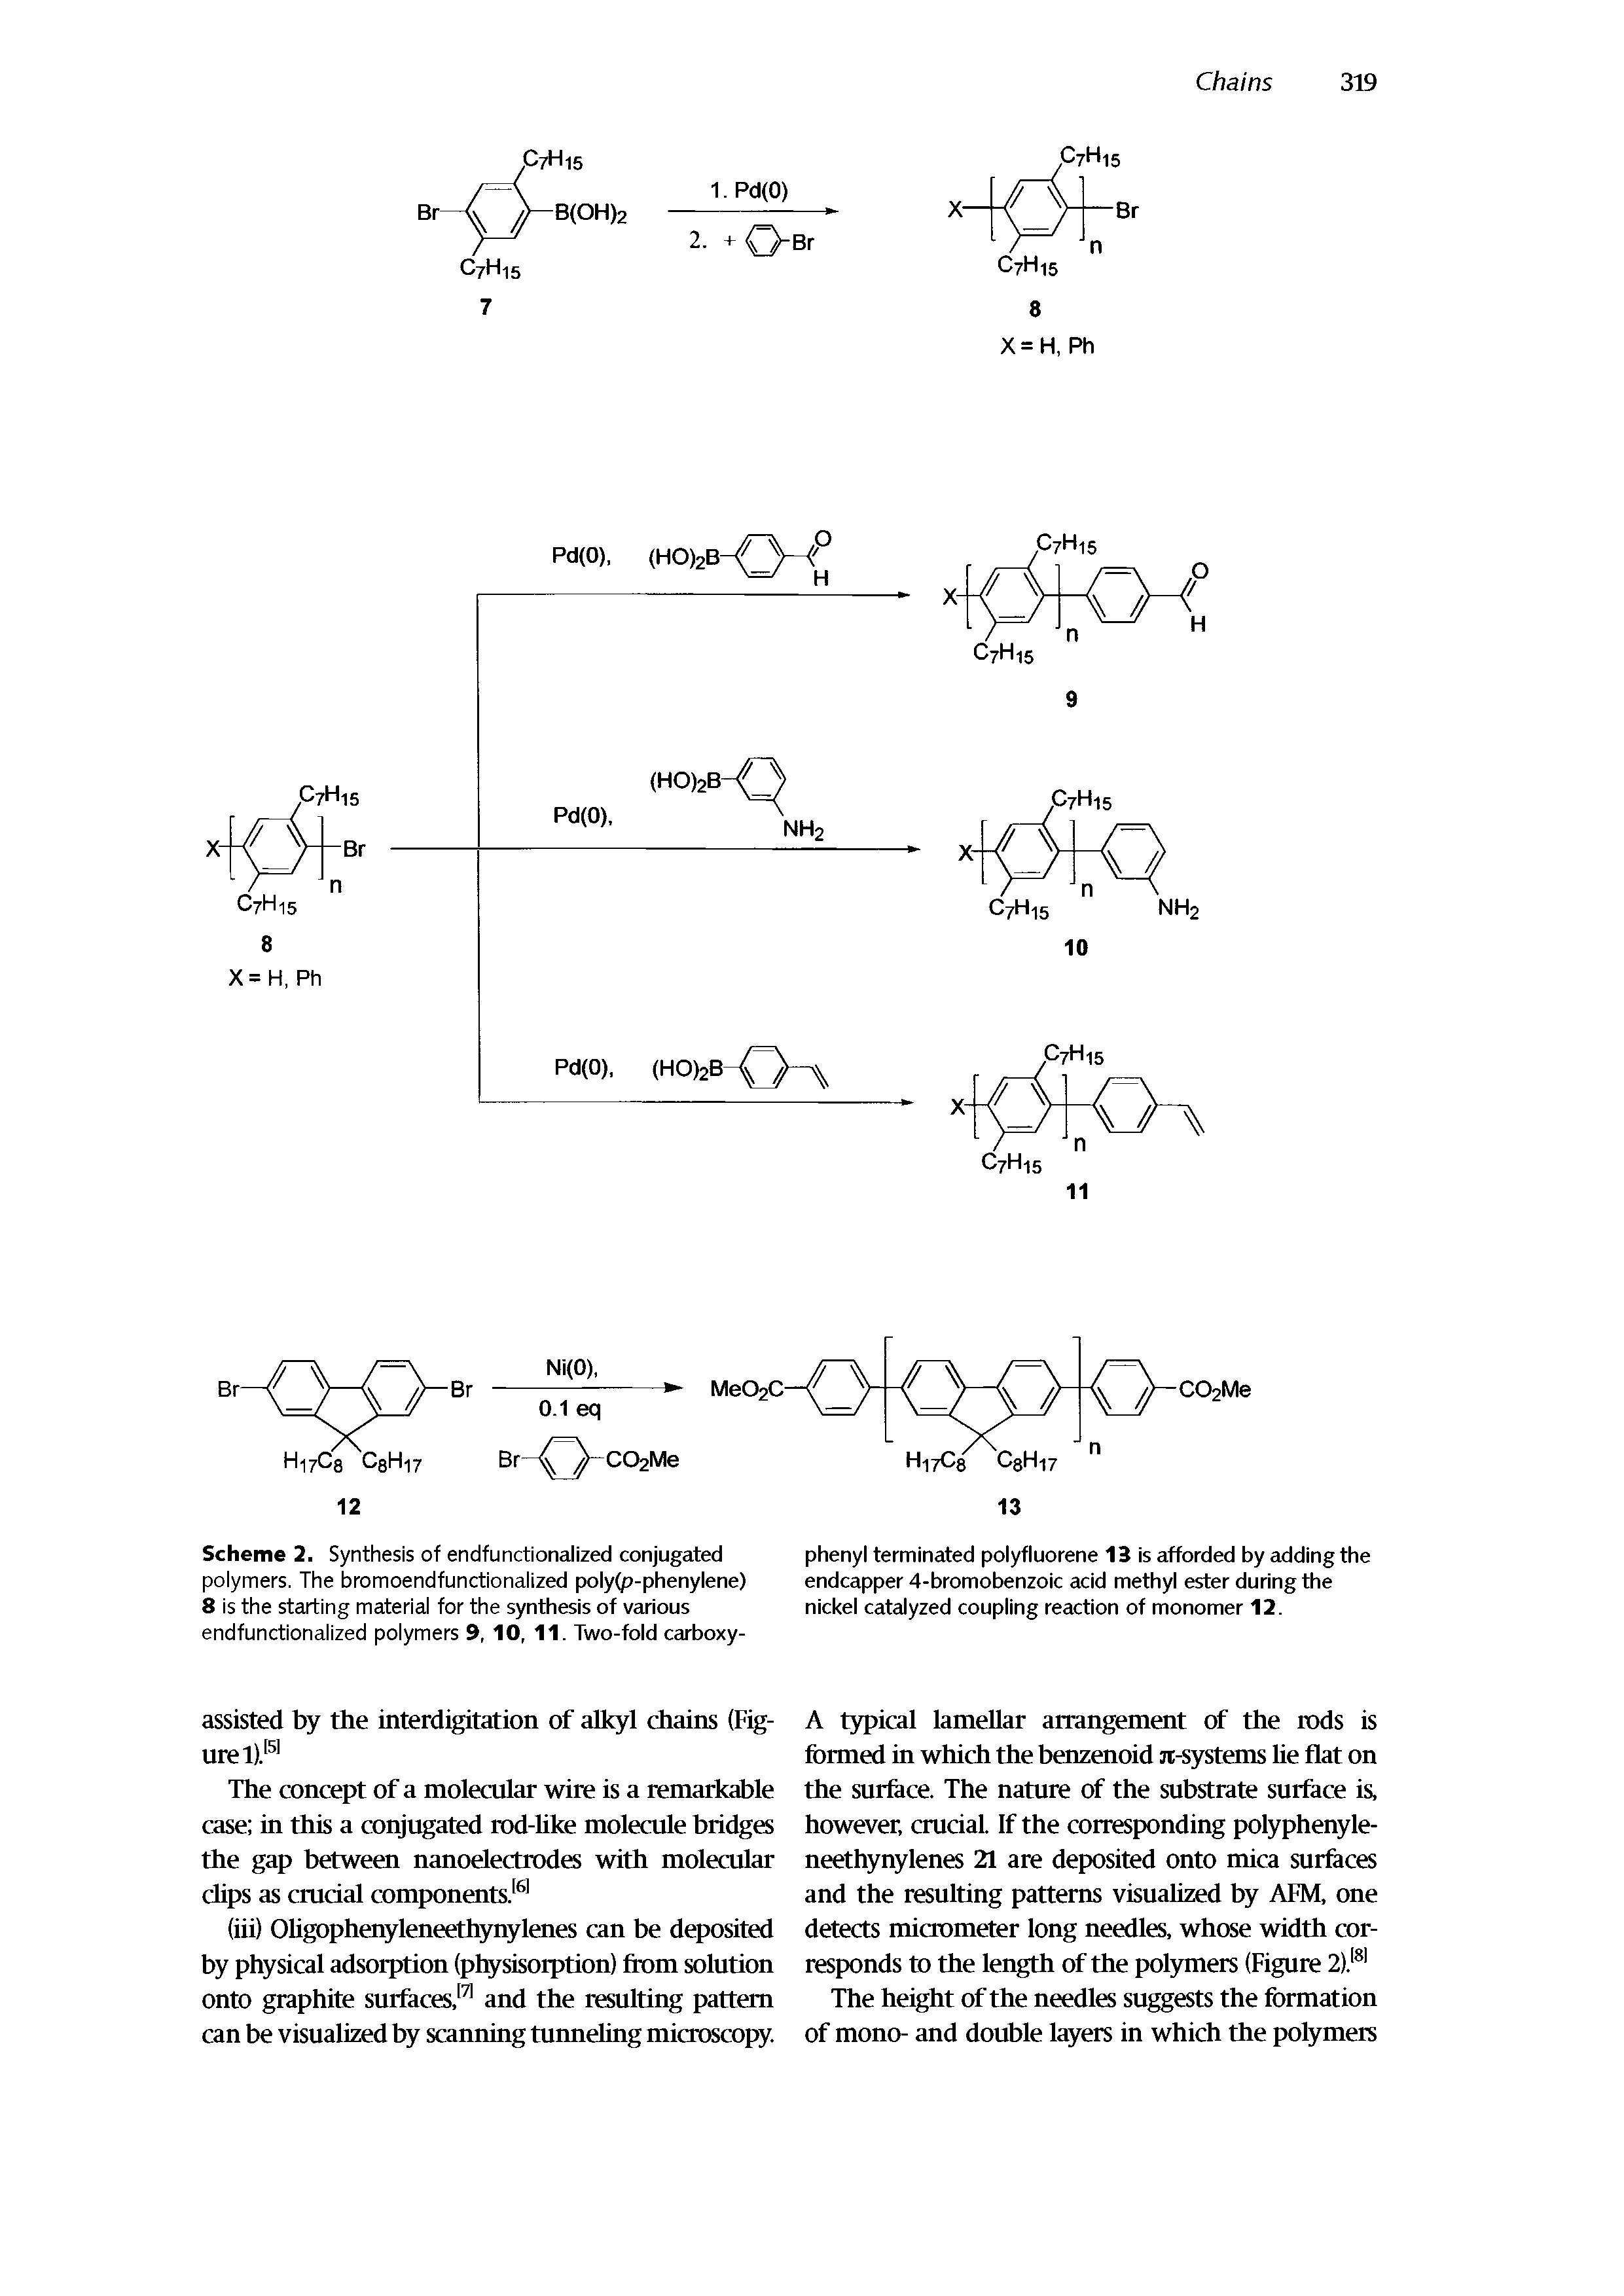 Scheme 2. Synthesis of endfunctionalized conjugated polymers. The bromoendfunctionalized poly(p-phenylene) 8 is the starting material for the synthesis of various endfunctionalized polymers 9, 10, 11. Two-fold carboxy-...